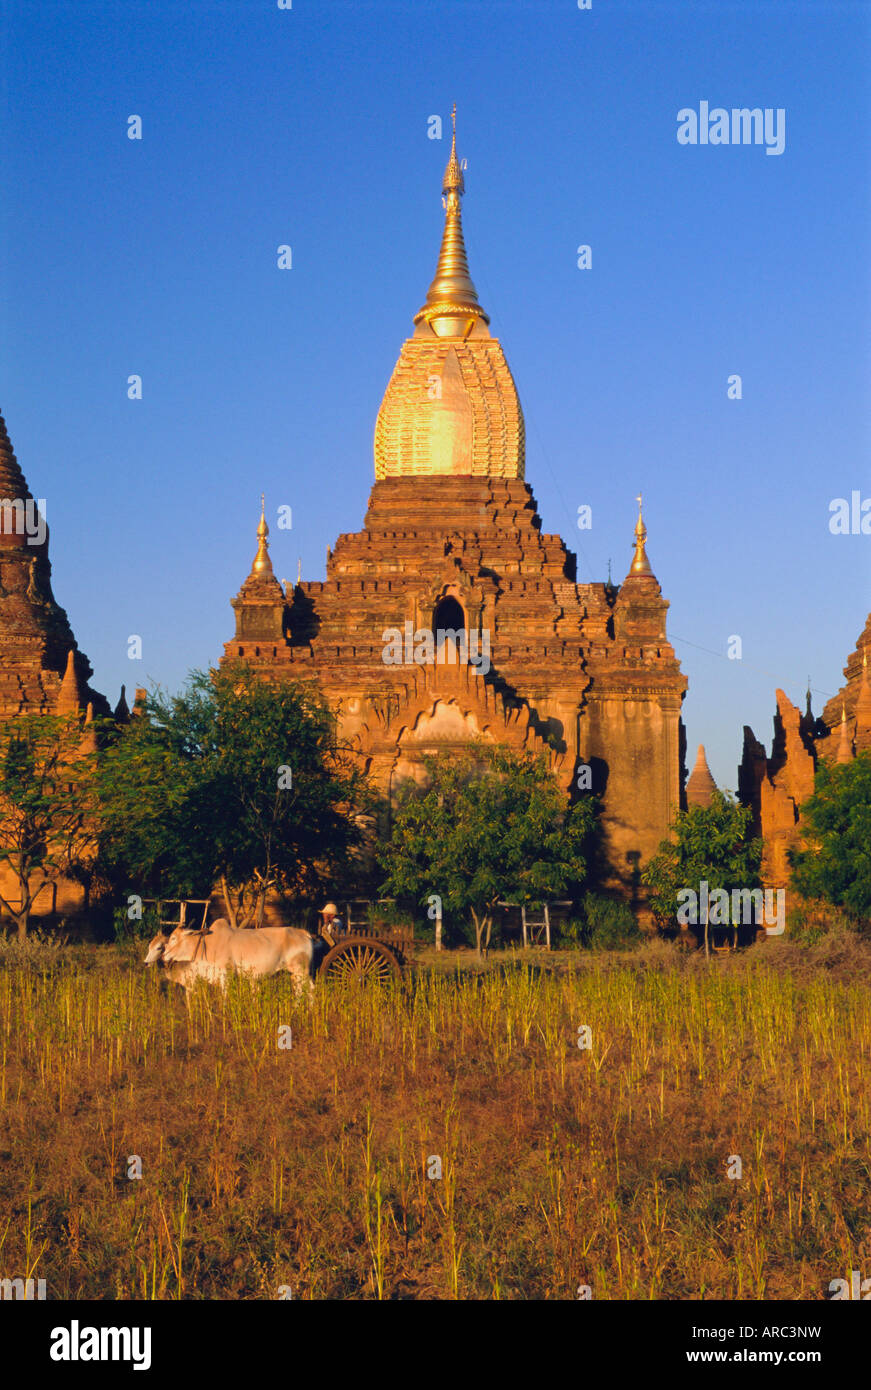 Gold gilded spire on ancient temple, old Bagan (Pagan), Myanmar (Burma) Stock Photo